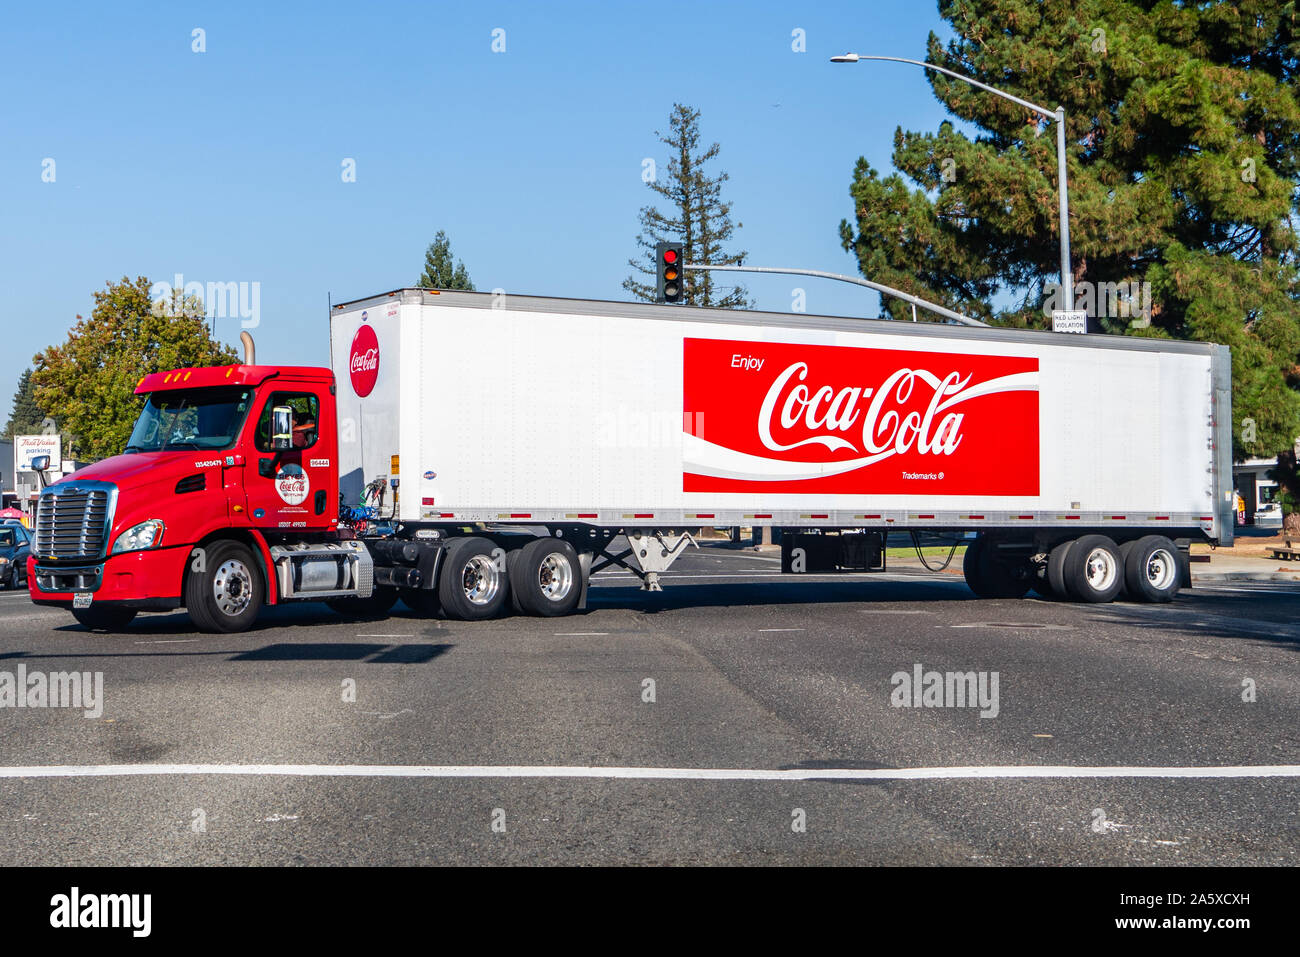 Oct 14, 2019 Mountain View / CA / USA - Coca Cola truck driving on a street in San Francisco Bay Area Stock Photo